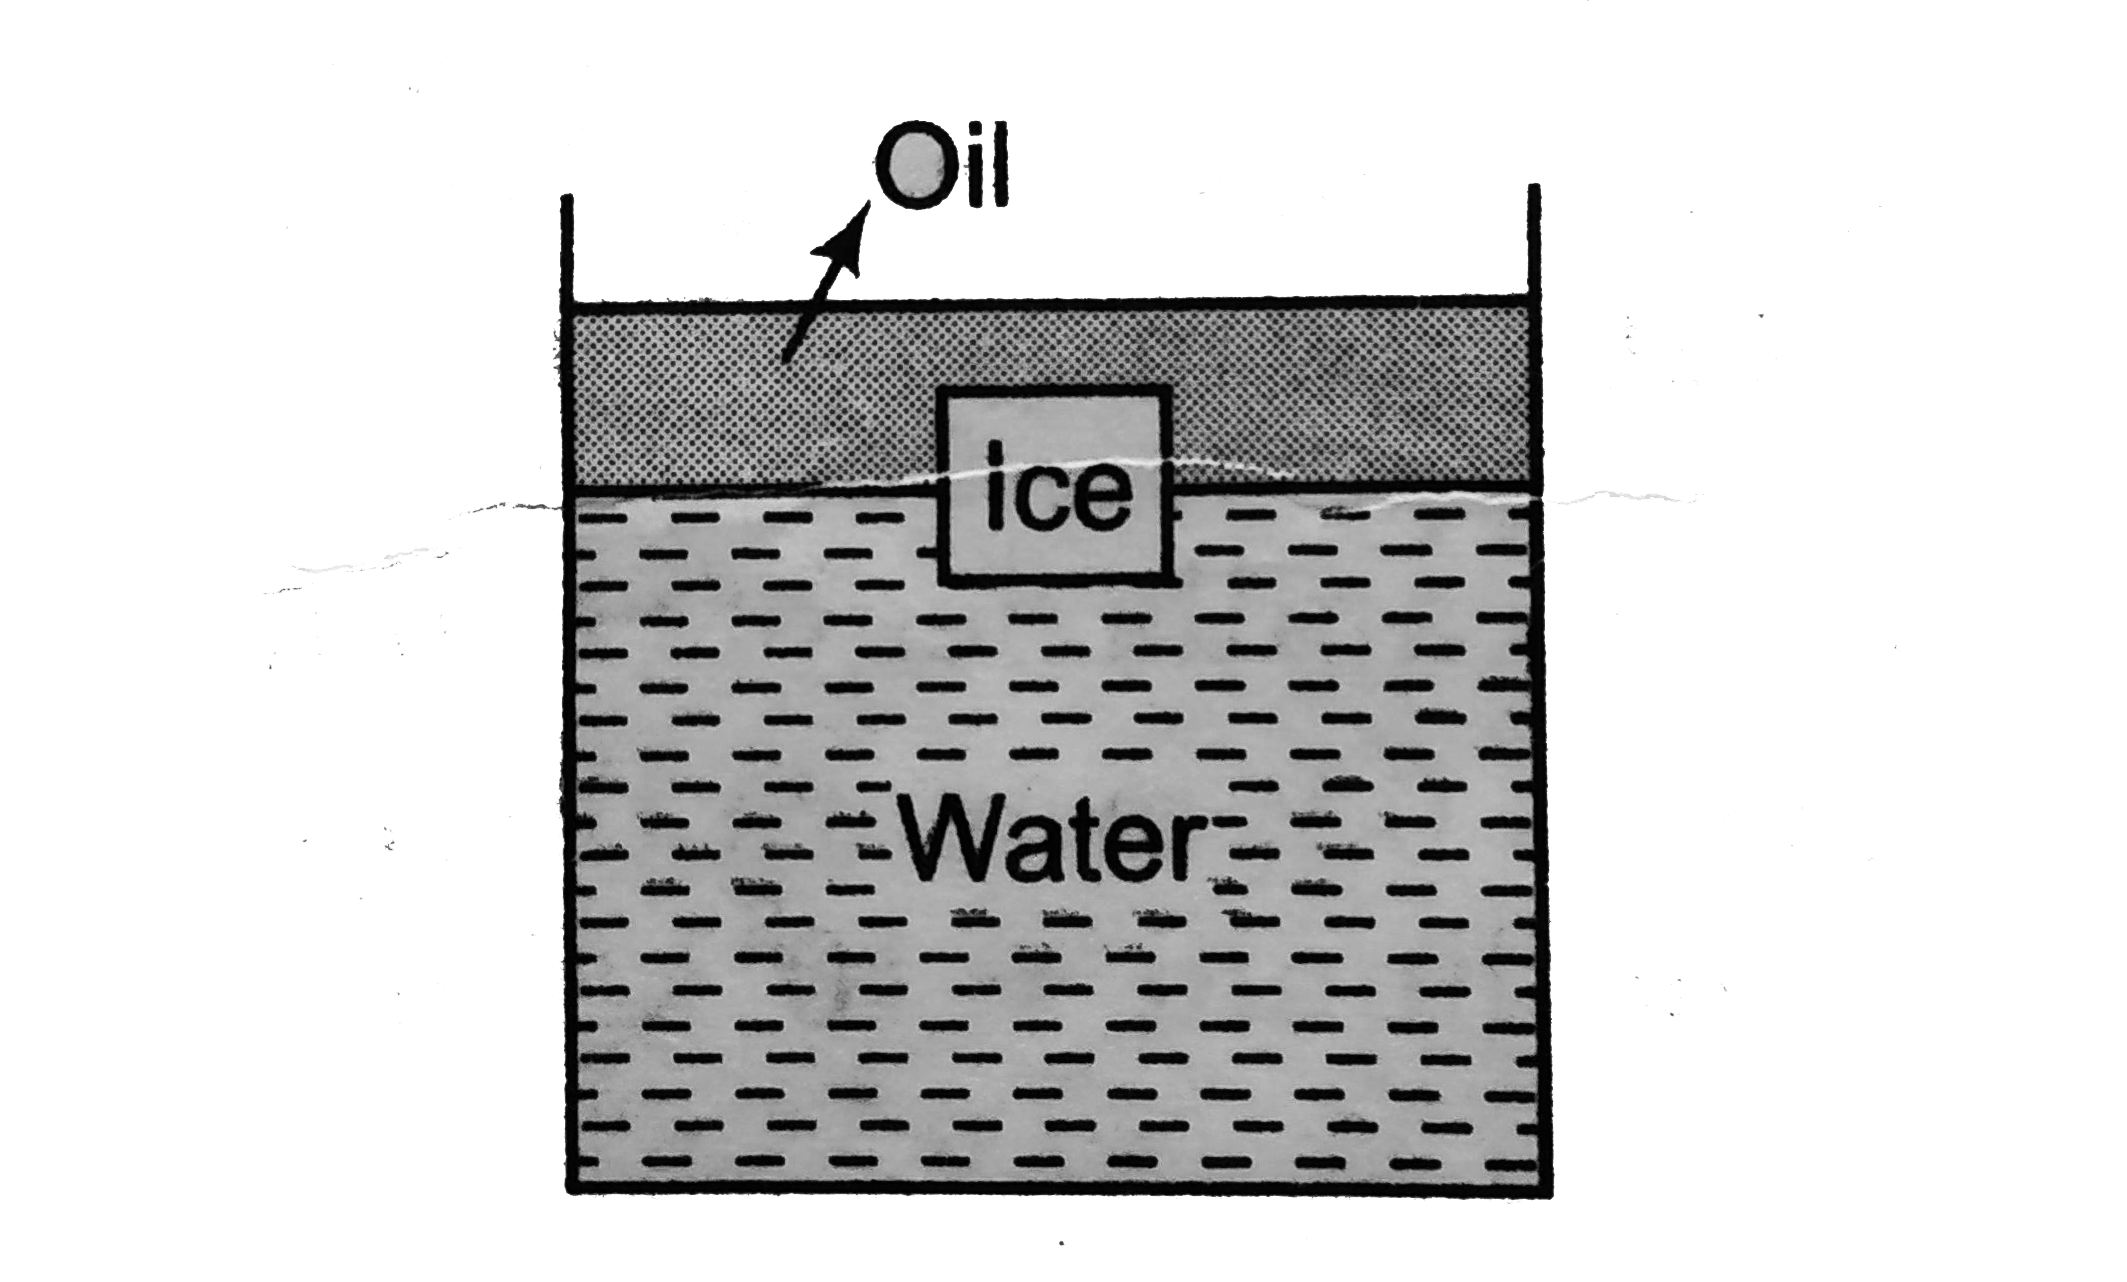 An ice cube is floating in water above which a layer of lighter oil is poured. As the ice melts completely, the level of interface and the upper most level of oil will respectively